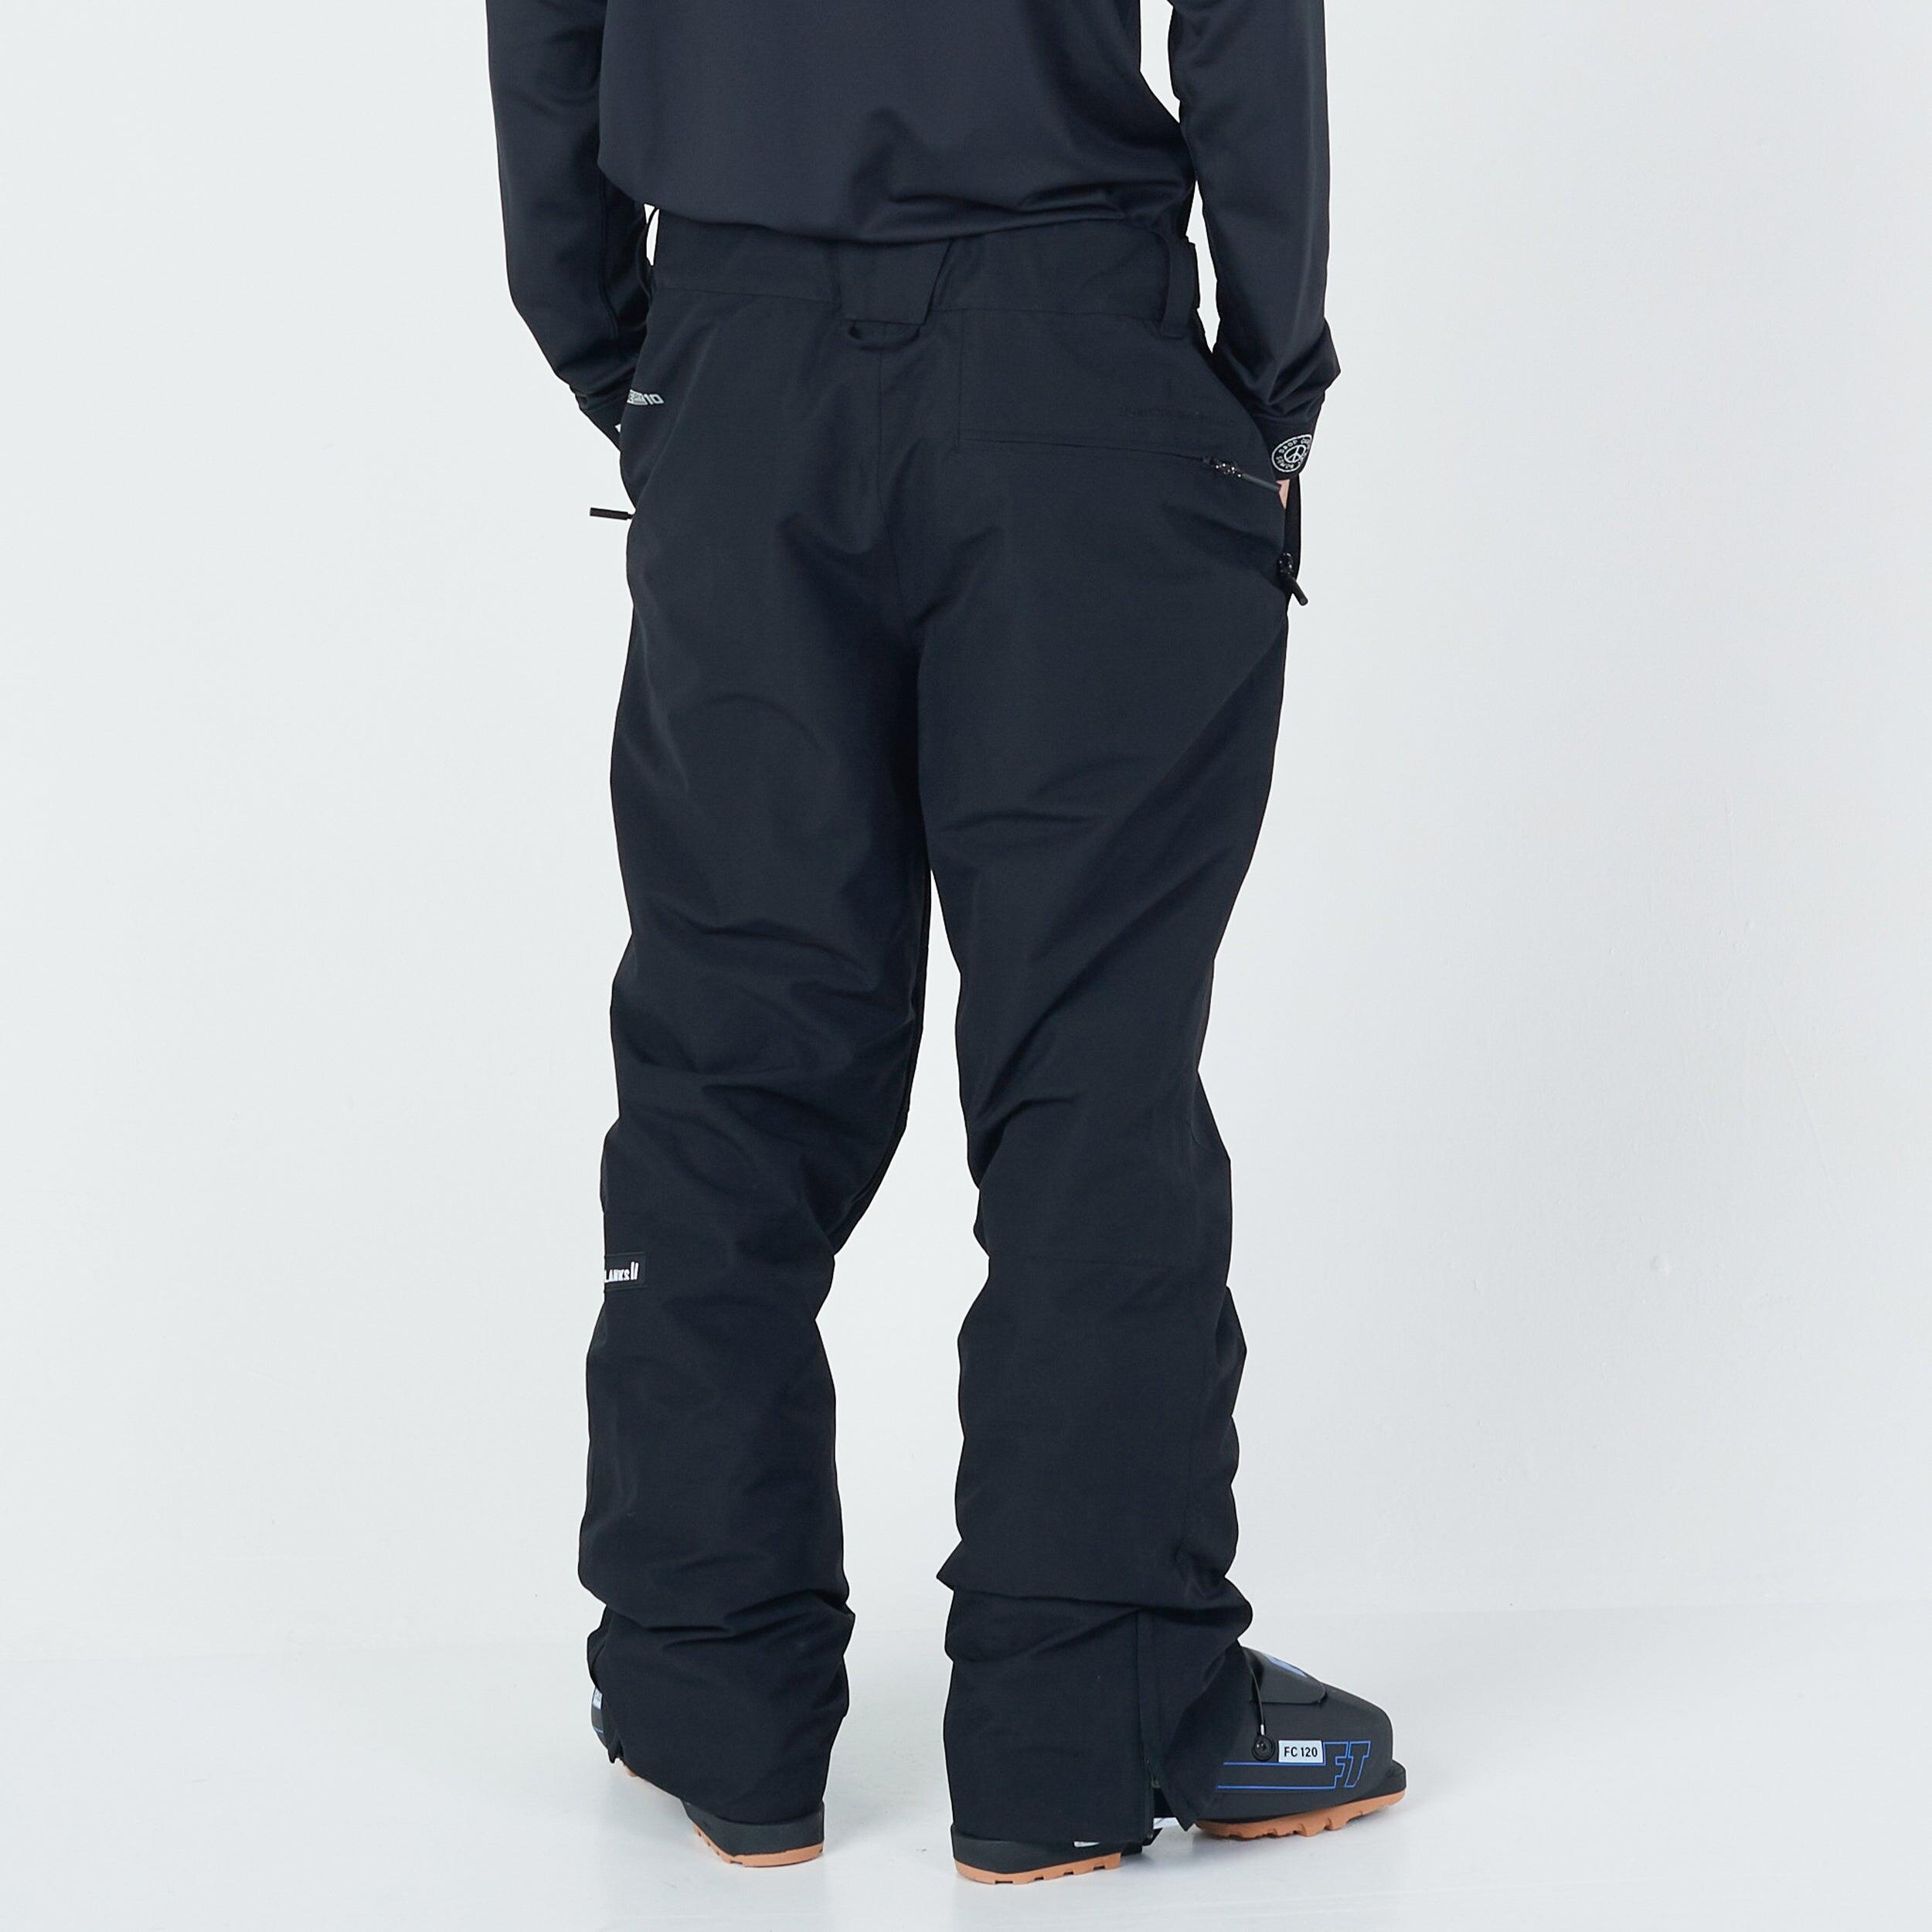 Planks Easy Rider Men's Ski Pants in Black with Pockets - Breathable Trousers 3/6